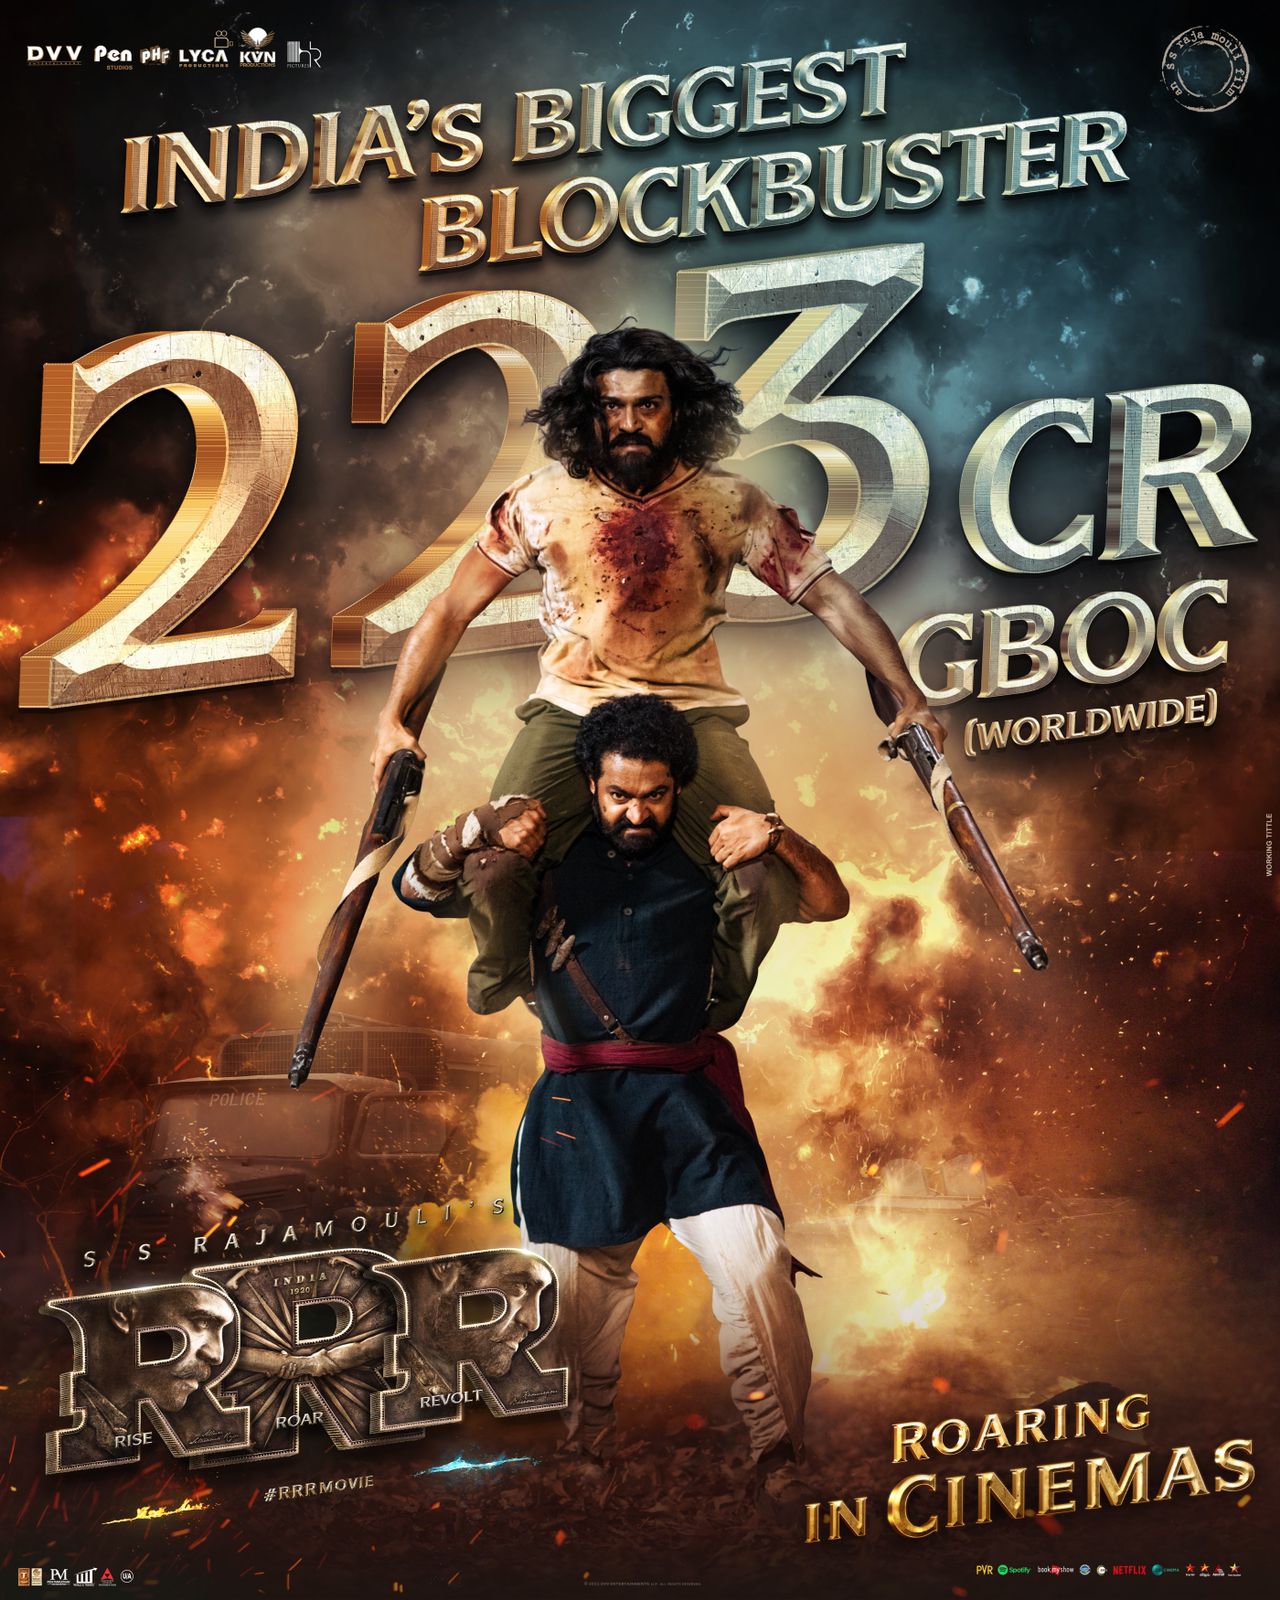 RRR Movie day 1 box office collections crossing Baahubali 2